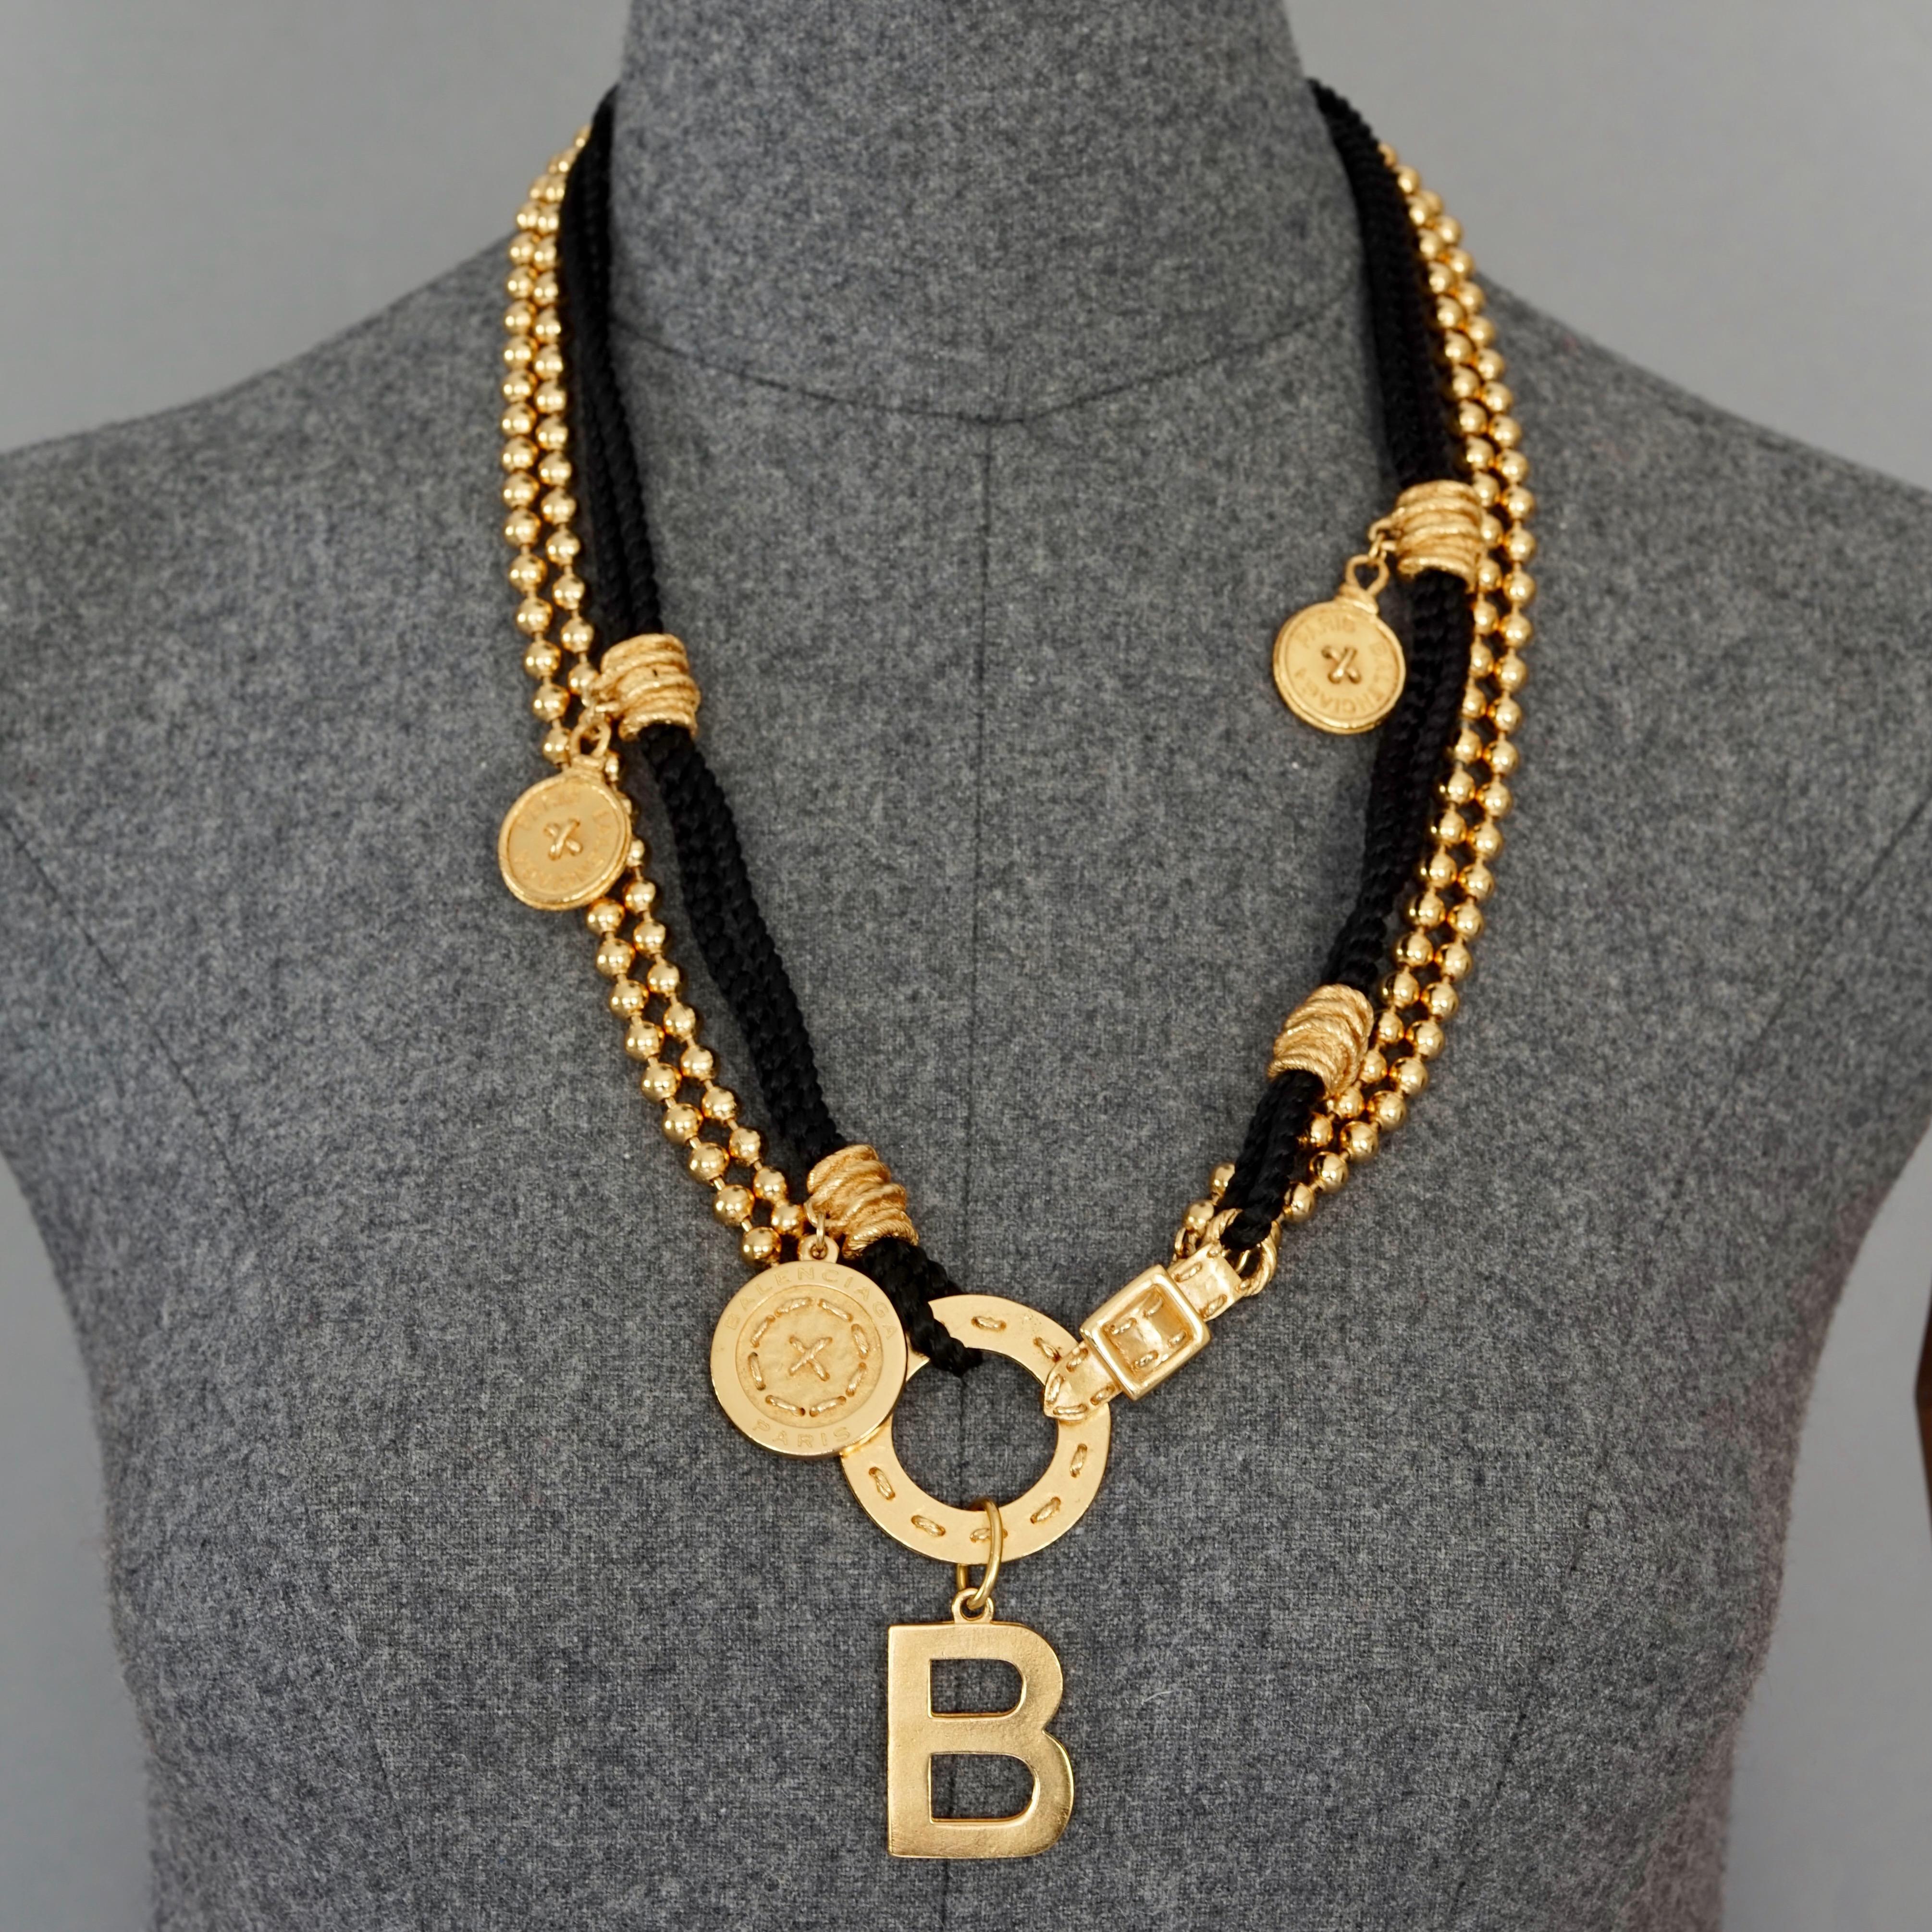 Vintage BALENCIAGA Art Deco Black Enamel Rhinestone Necklace

Measurements:
Discs: 2.95 inches (7.5 cm)
Wearable Length: 25.19 inches (64 cm)

Features:
- 100% Authentic BALENCIAGA.
- Multi Layer ball chains and black cords with charms.
- Hook